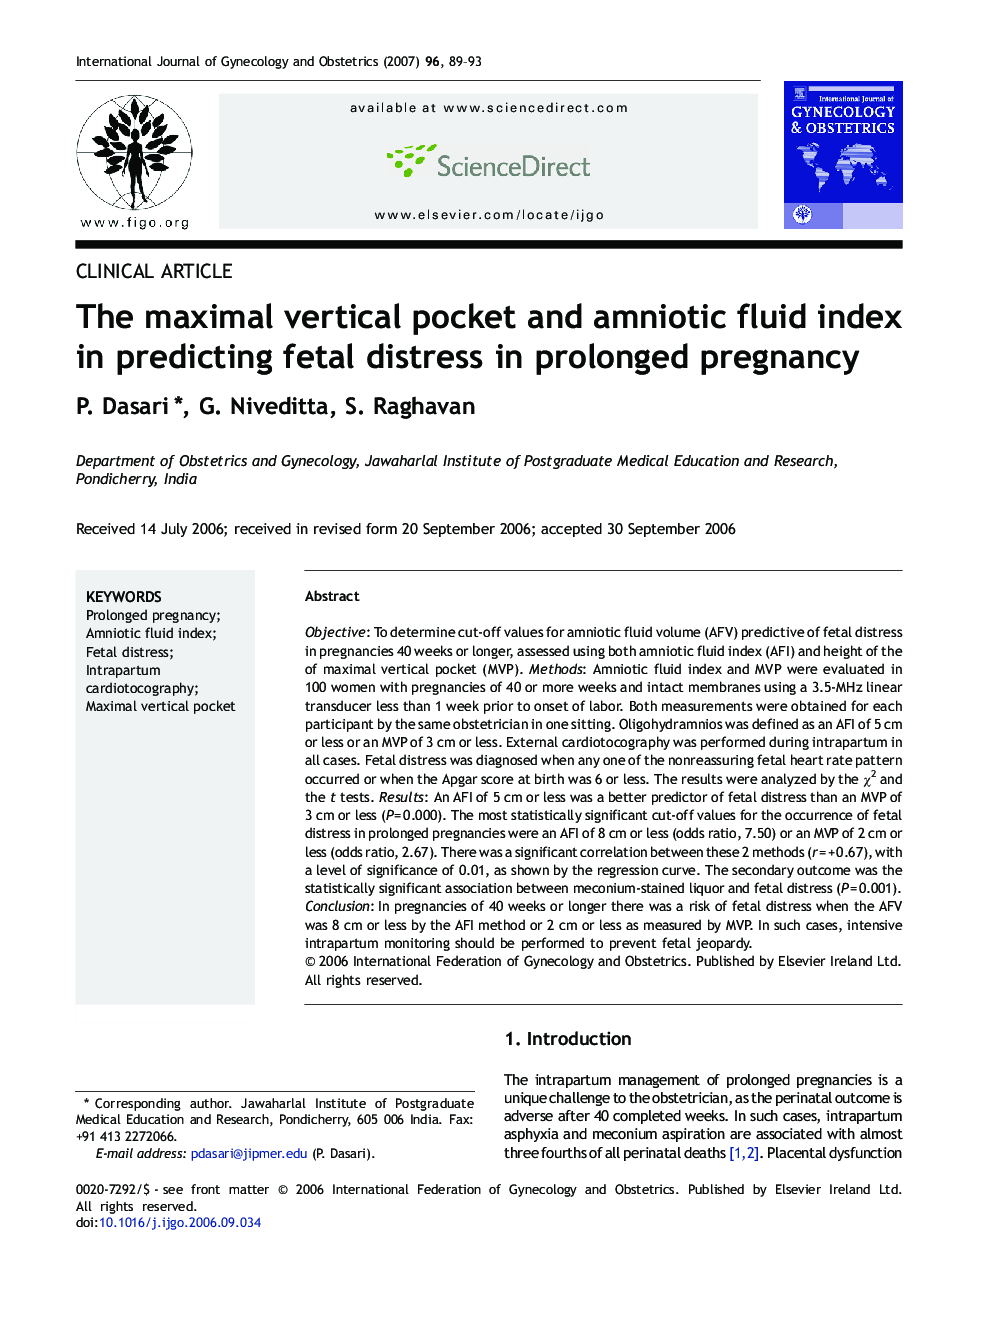 The maximal vertical pocket and amniotic fluid index in predicting fetal distress in prolonged pregnancy